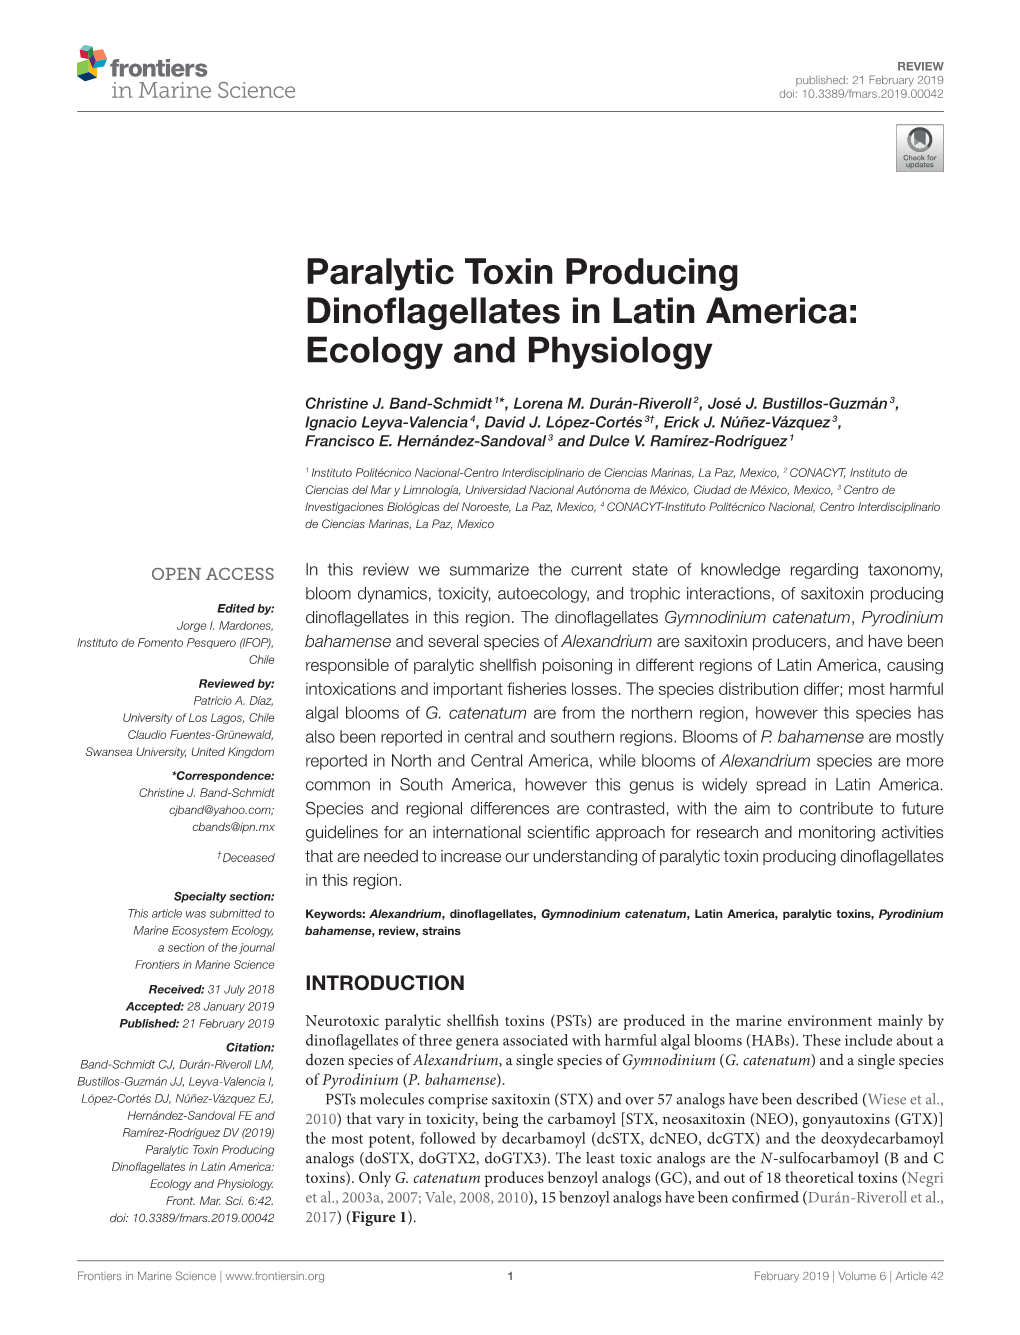 Paralytic Toxin Producing Dinoflagellates in Latin America: Ecology and Physiology